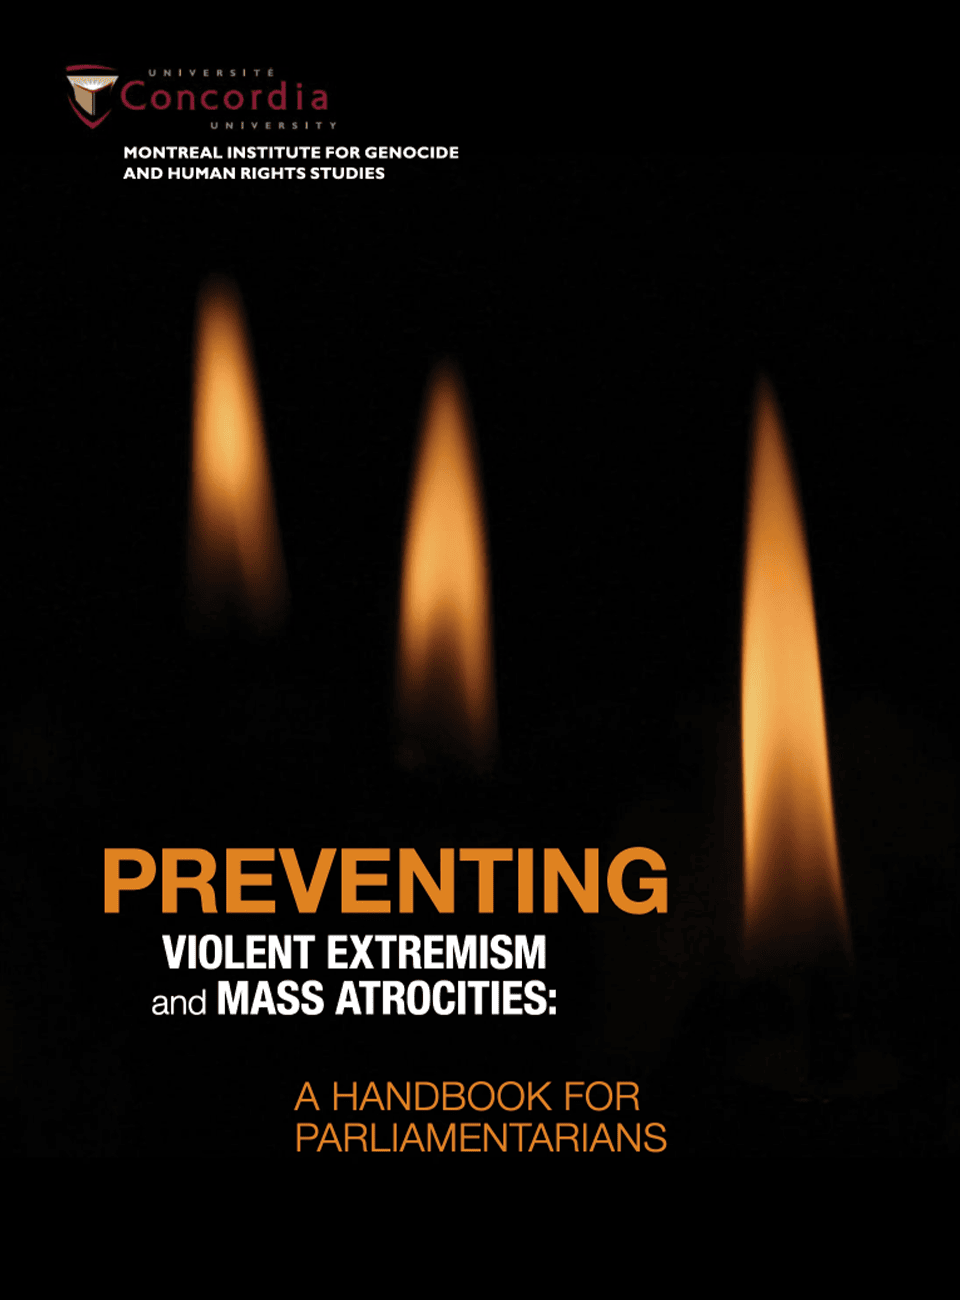 Handbook for Preventing Violent Extremism and Mass Atrocities